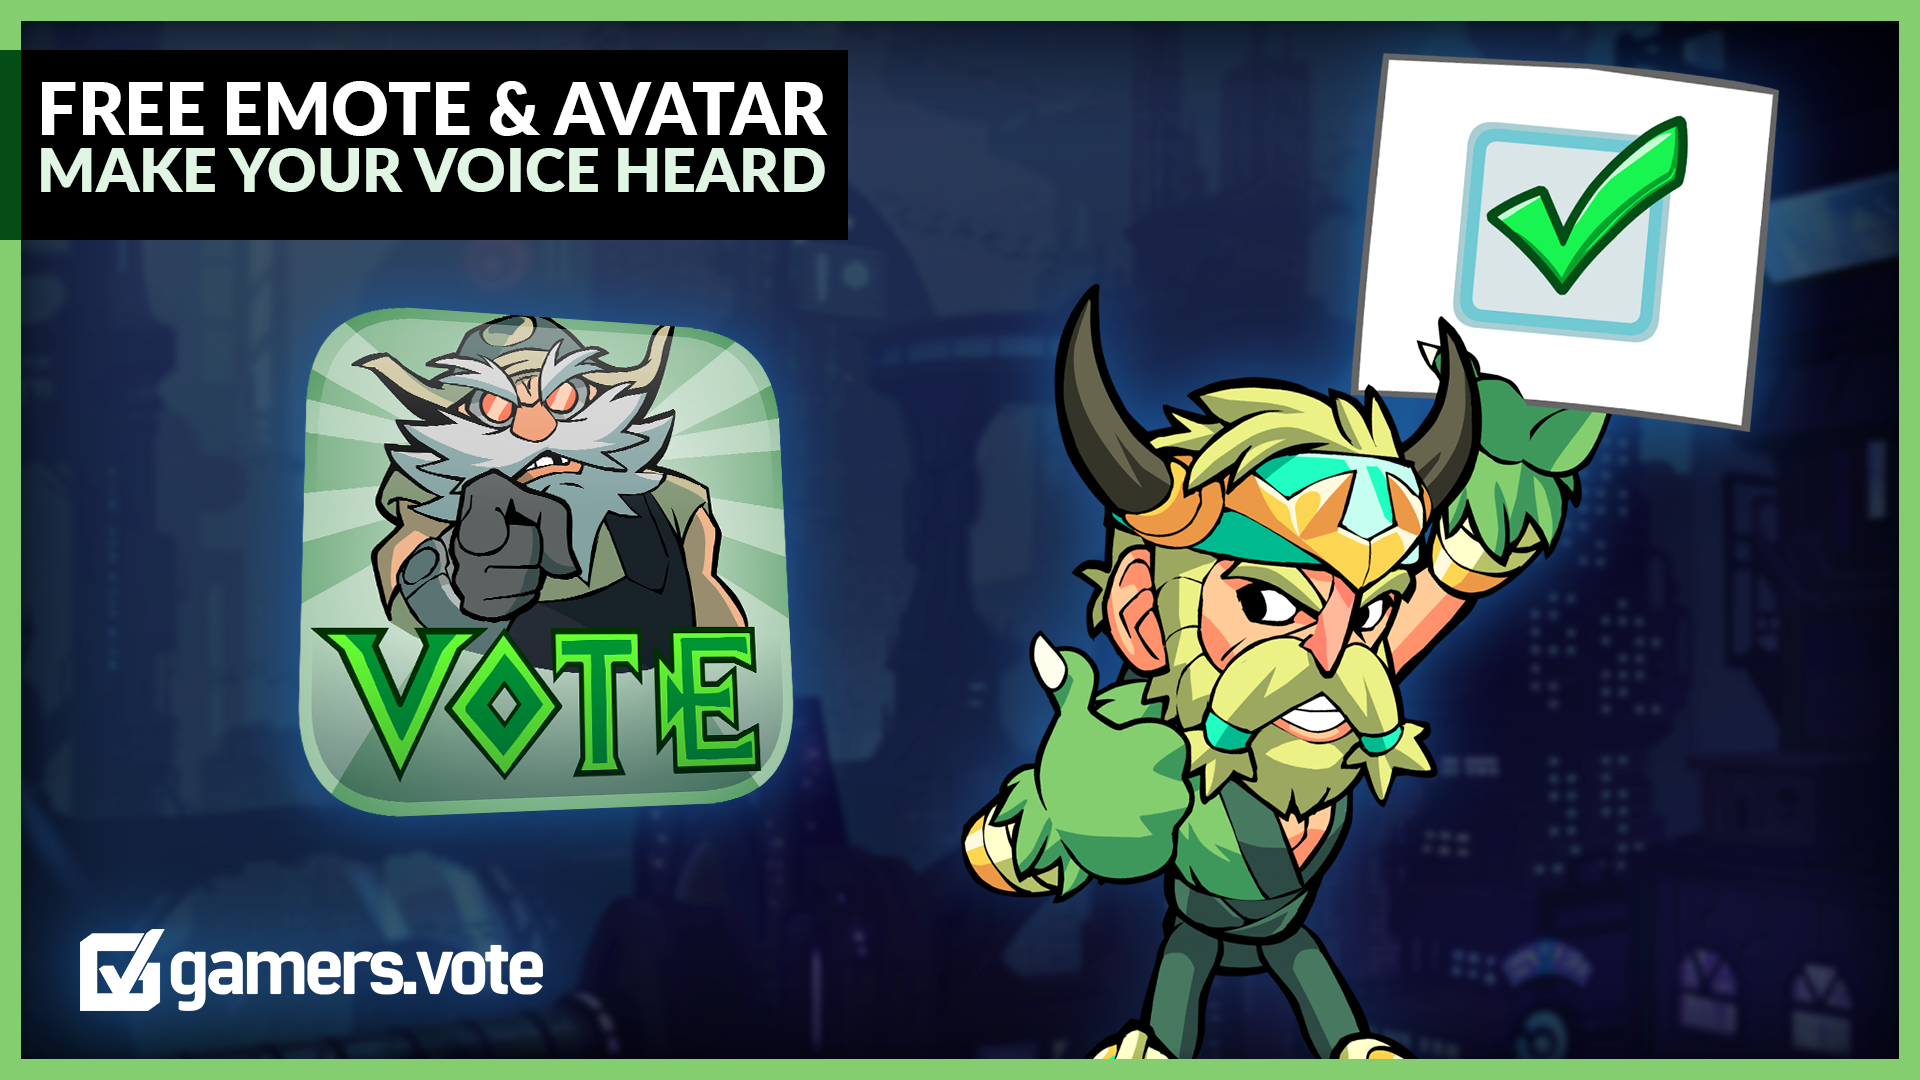 Get a free Vote Emote and Avatar and help the Brawlhalla community be heard November 3rd